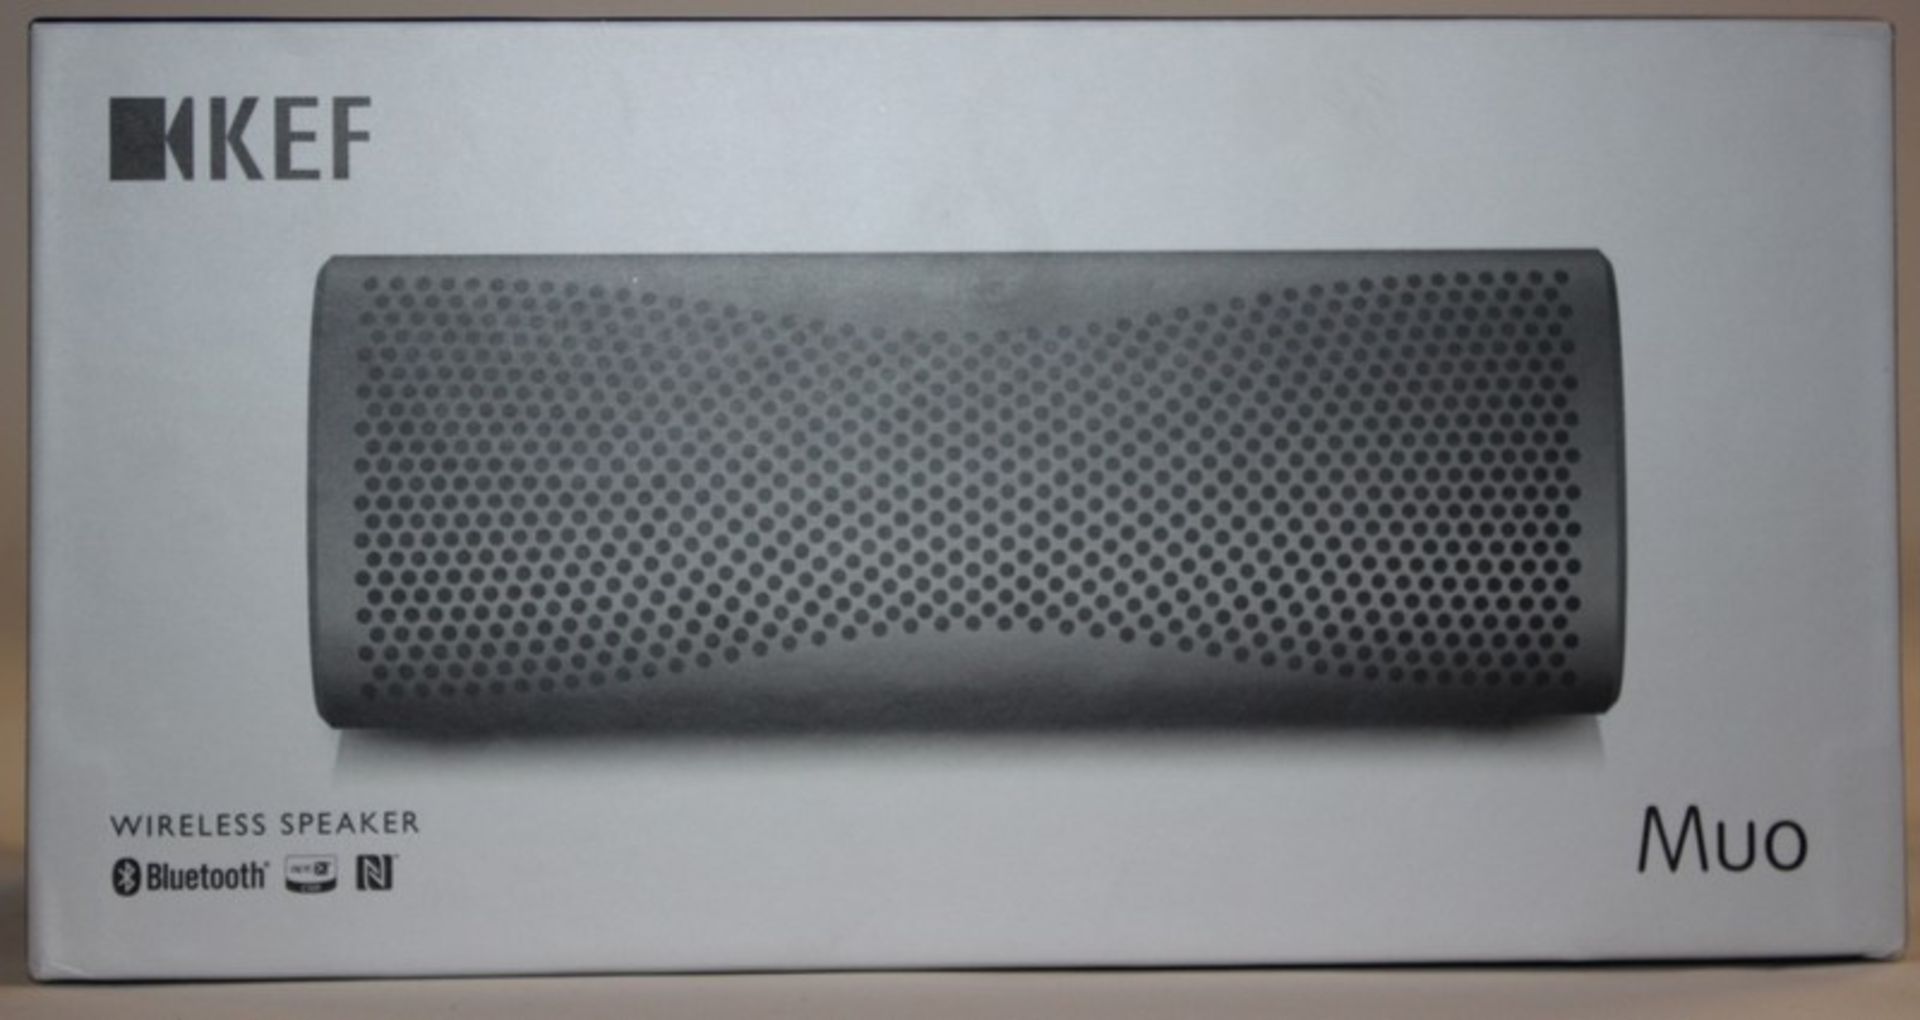 A KEF Muo wireless speaker with high resolution.